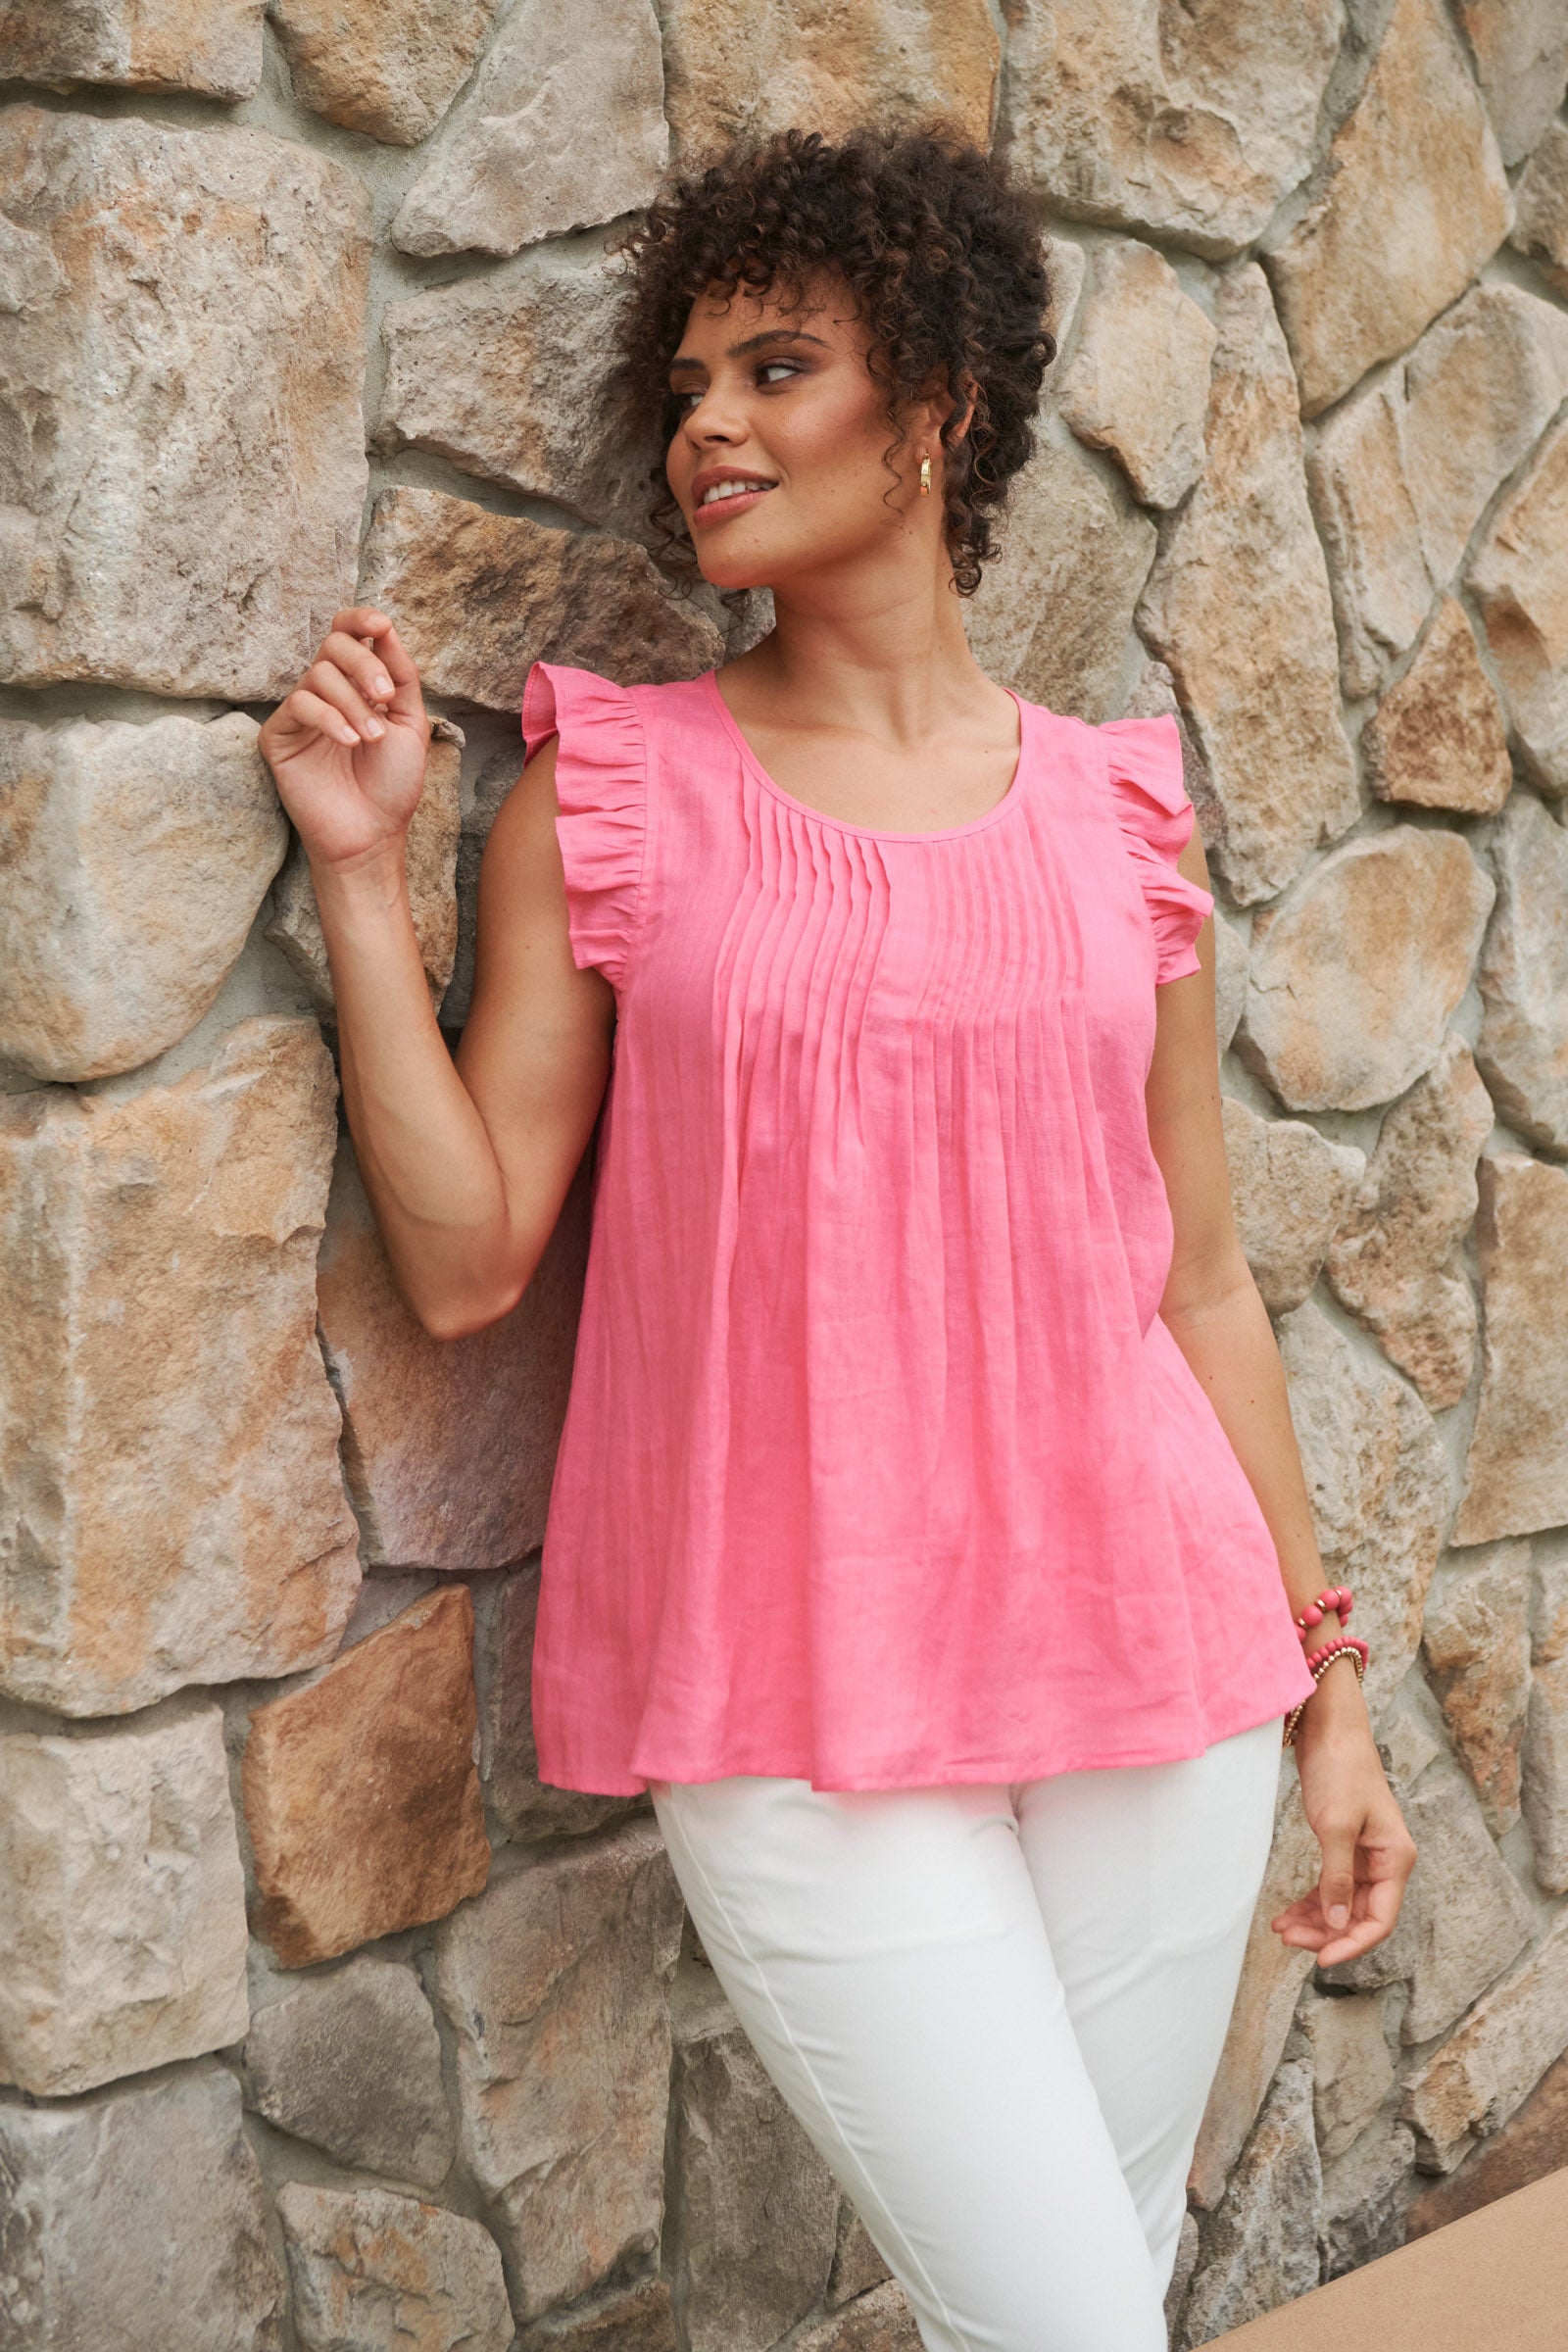 La Vie Frill Top - Candy - eb&ive Clothing - Top Sleeveless Linen